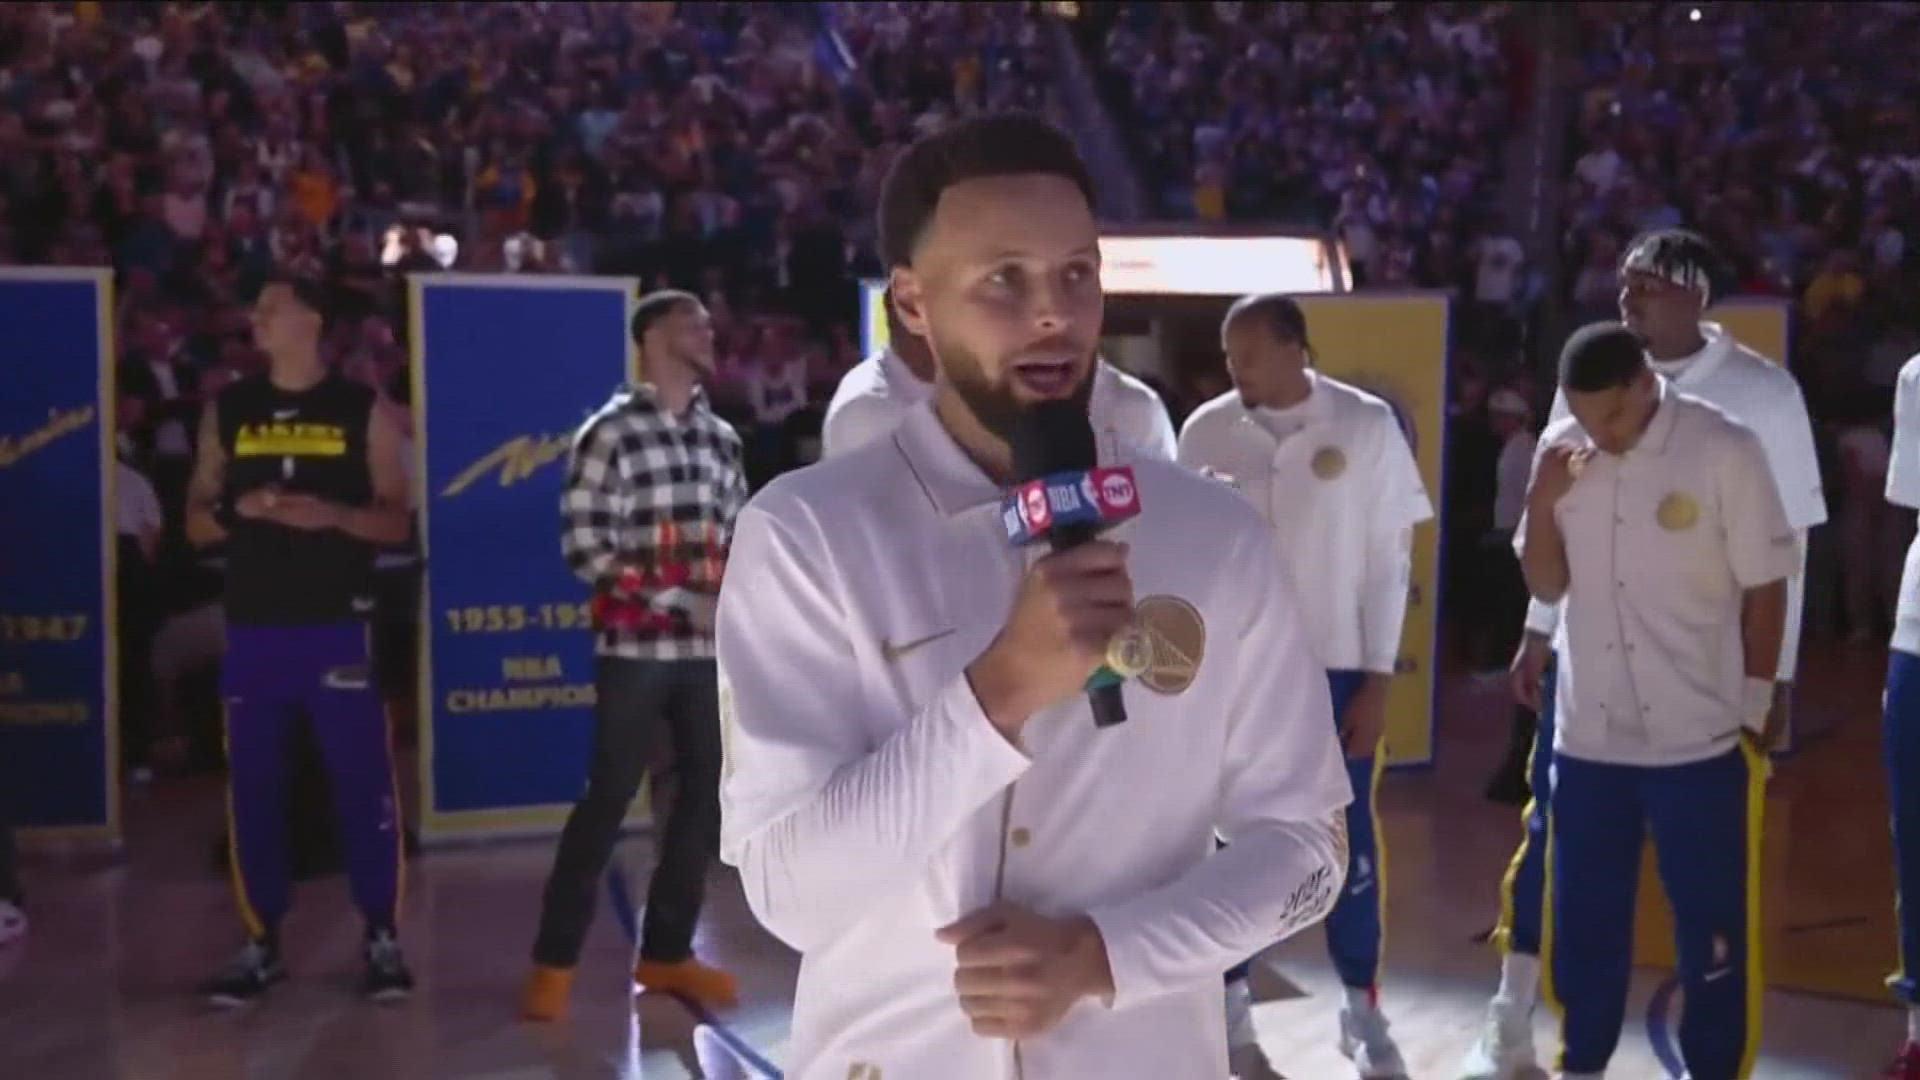 "We hope that she comes home soon, that everybody's doing their part to get her home," Curry said during Golden State's championship ring ceremony.